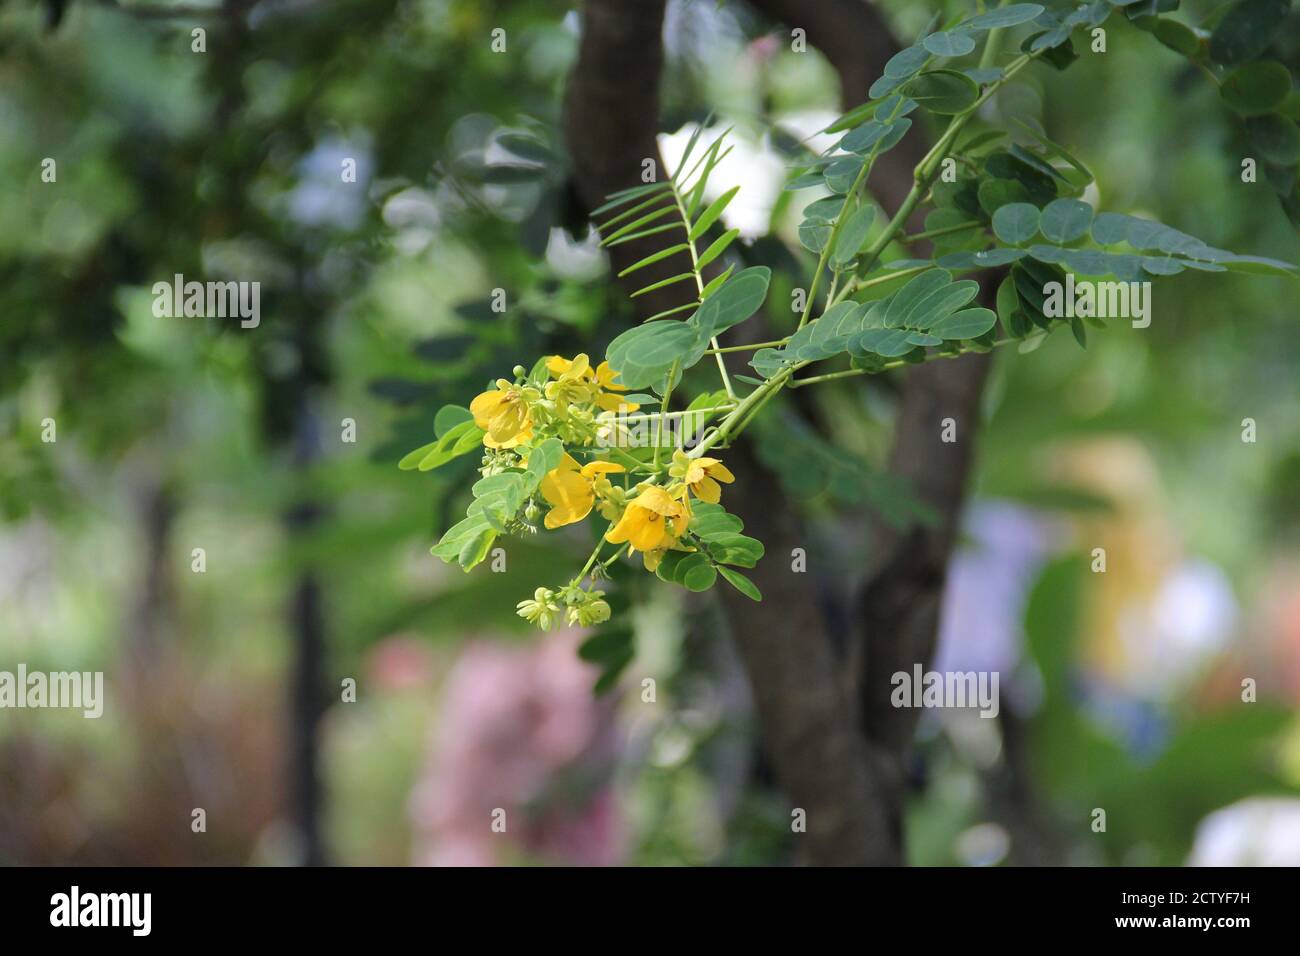 small yellow flowers that grow and hang on branches with green leaves Stock Photo